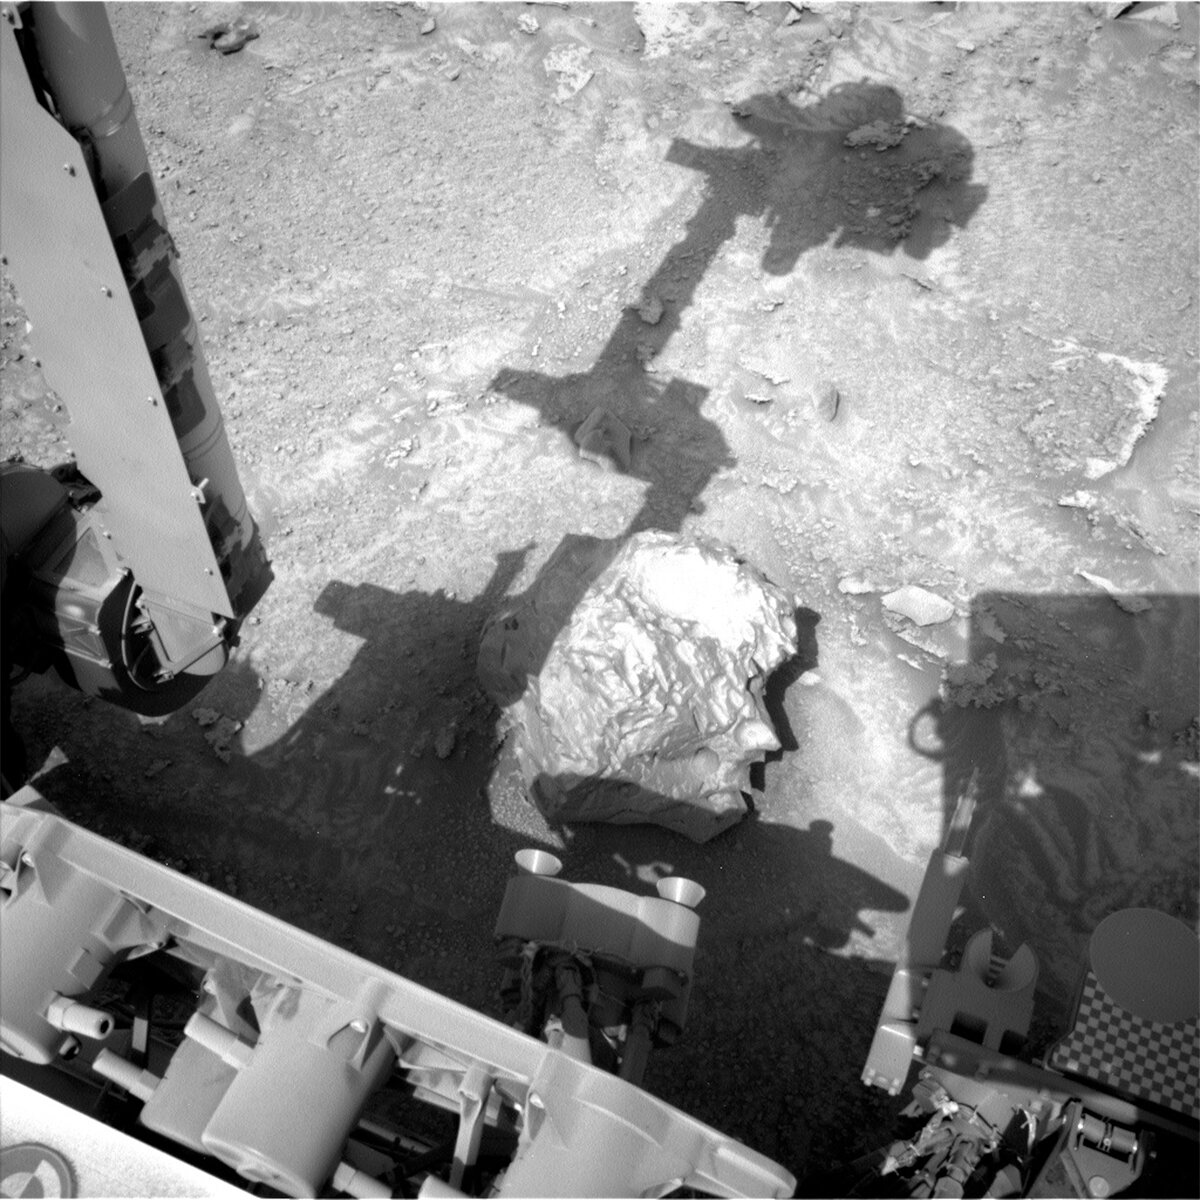 This image showing part of the Curiosity rover and the shadow of its arm above a rock was taken by Left Navigation Camera onboard the Curiosity rover on Sol 3724.